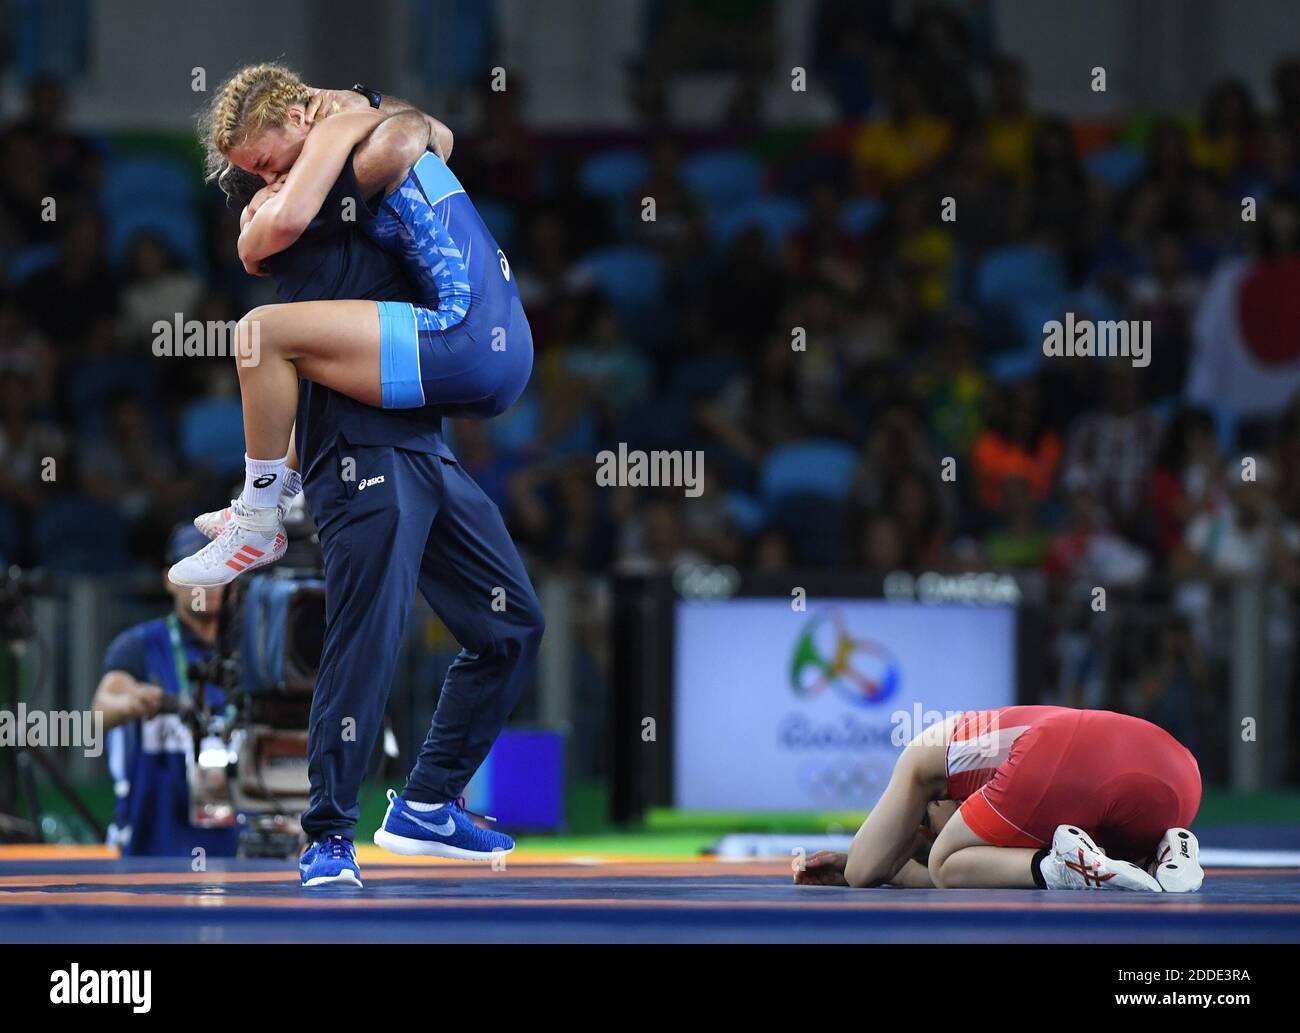 NO FILM, NO VIDEO, NO TV, NO DOCUMENTARY - Japan's Saori Yoshida buries her face in the mat as U.S. wrestler Helen Maroulis celebrates her gold-medal win in the 53kg wrestling final on Thursday, August 18, 2016, at the Olympic Games in Rio de Janeiro, Brazil. Maroulis won, a first for a U.S. woman. Photo by Mark Reis/Colorado Springs Gazette/TNS/ABACAPRESS.COM Stock Photo